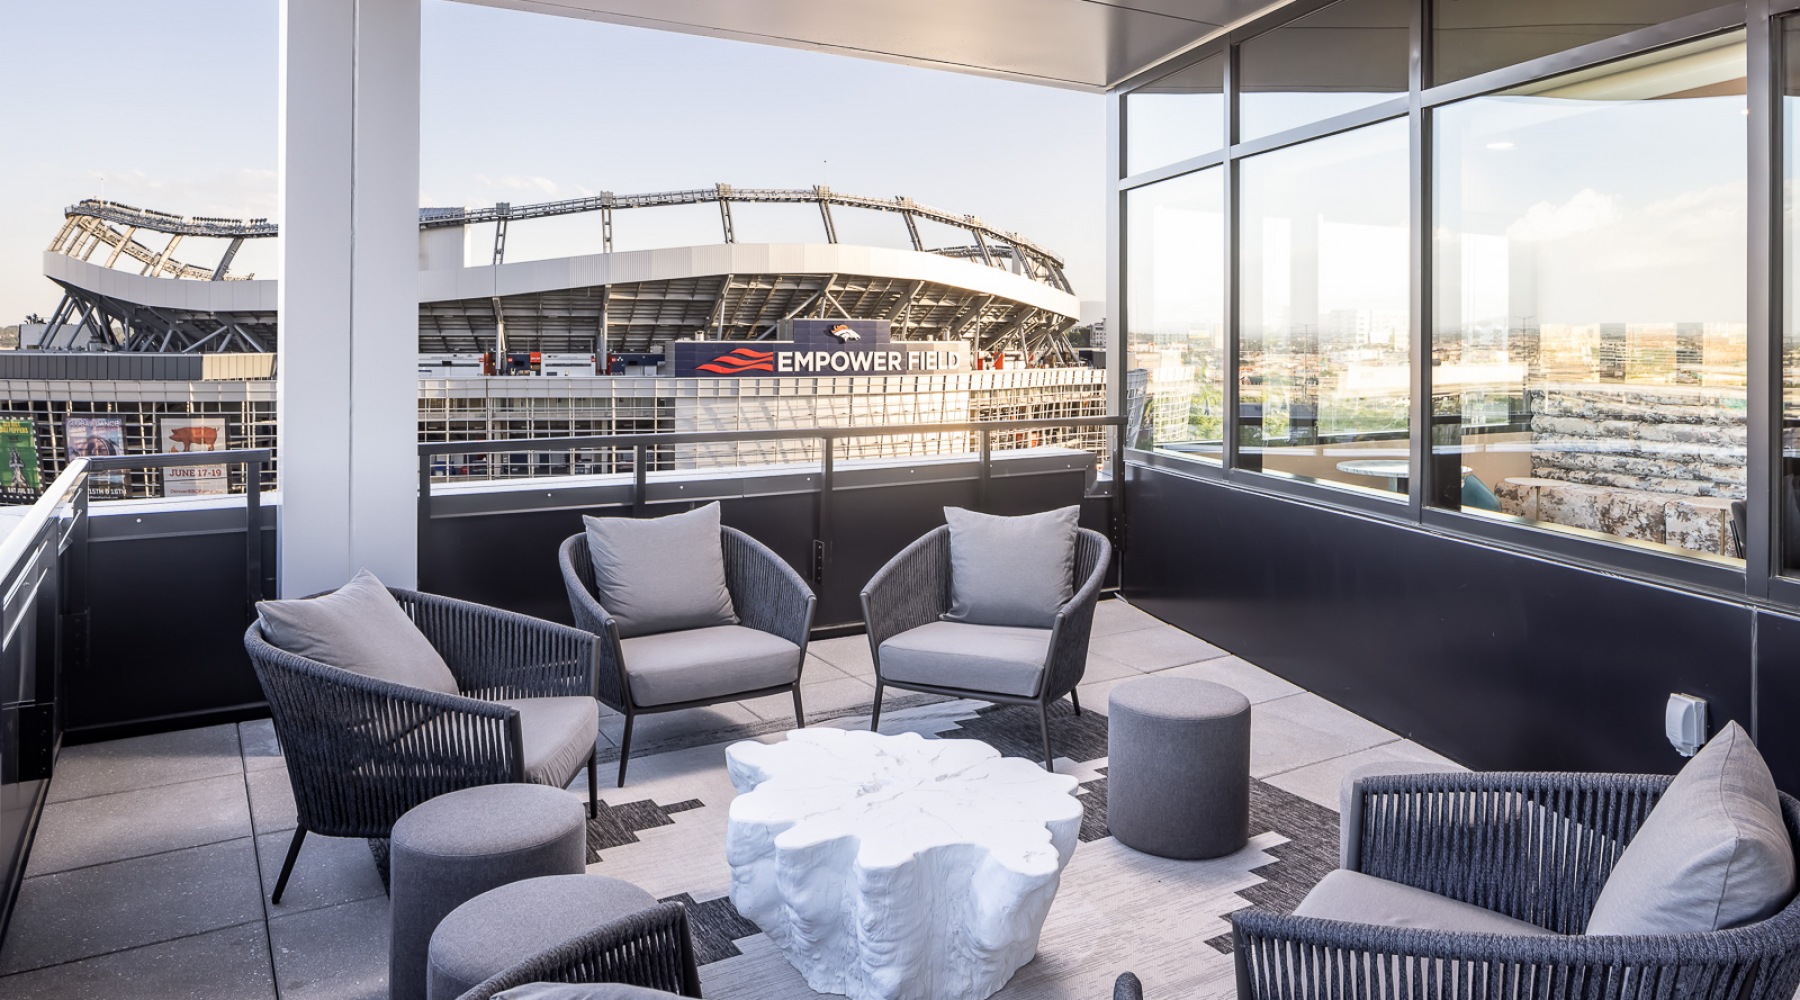 Empower Field at Mile High Suite Rentals